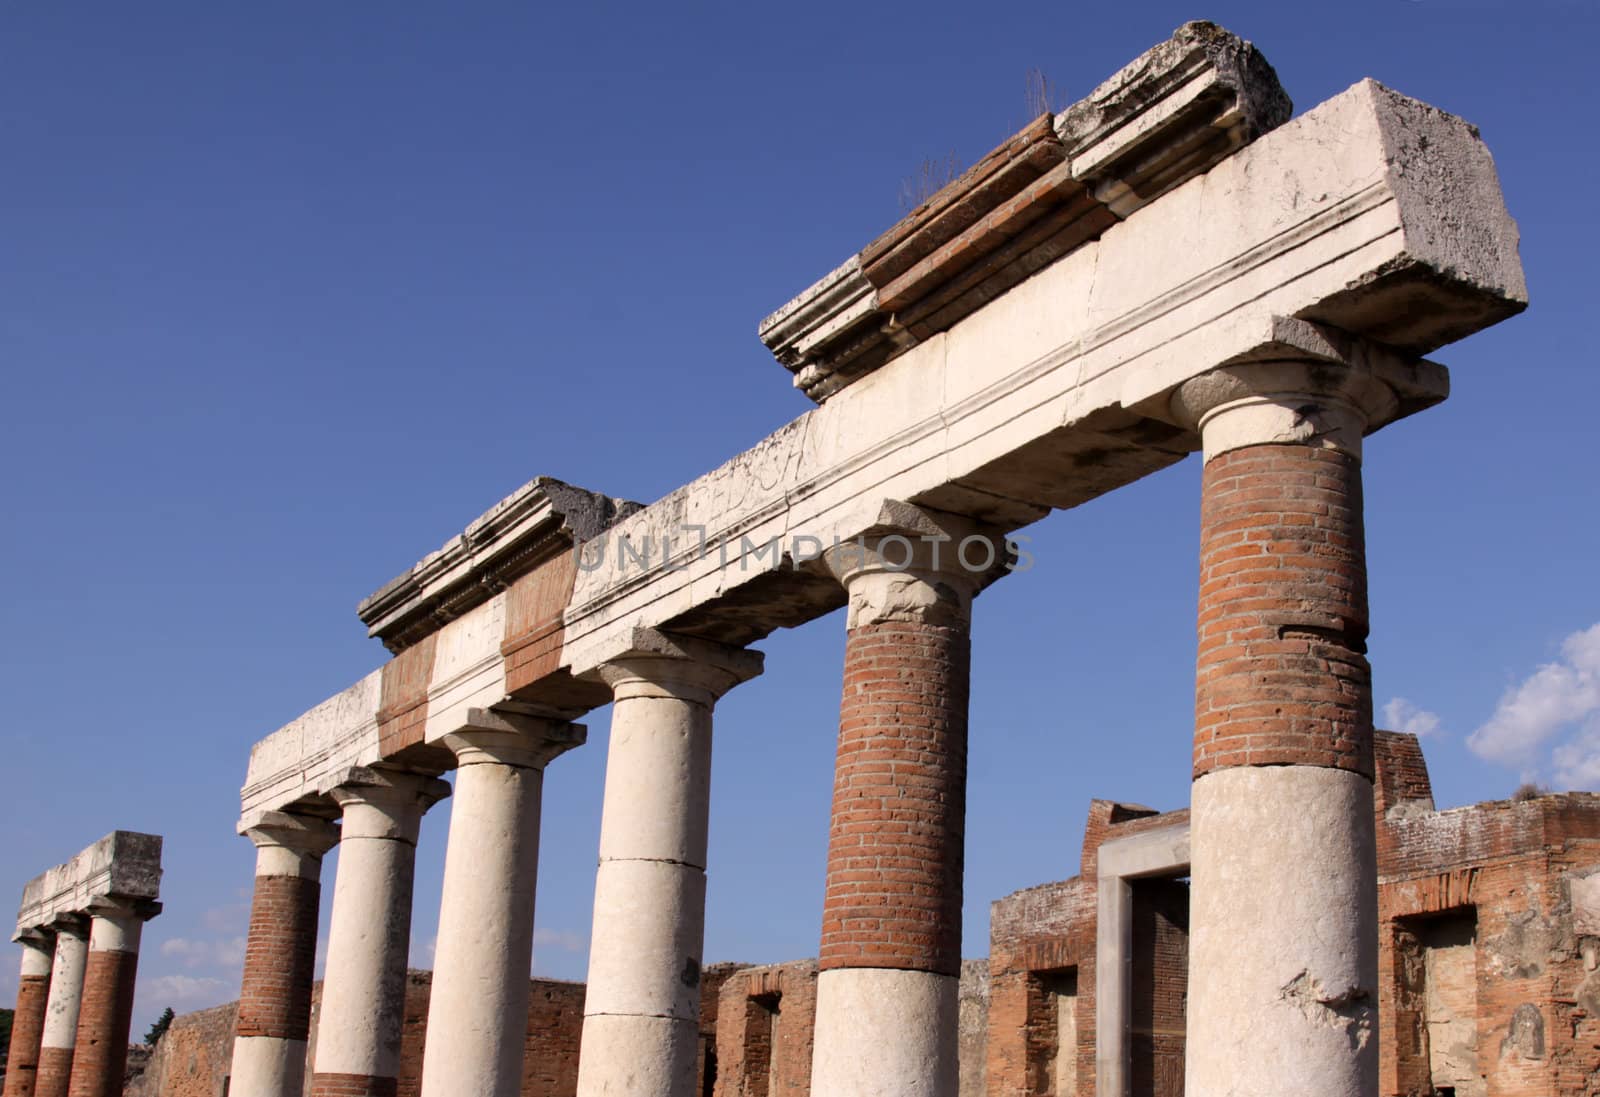 Columns in the Forum by ca2hill